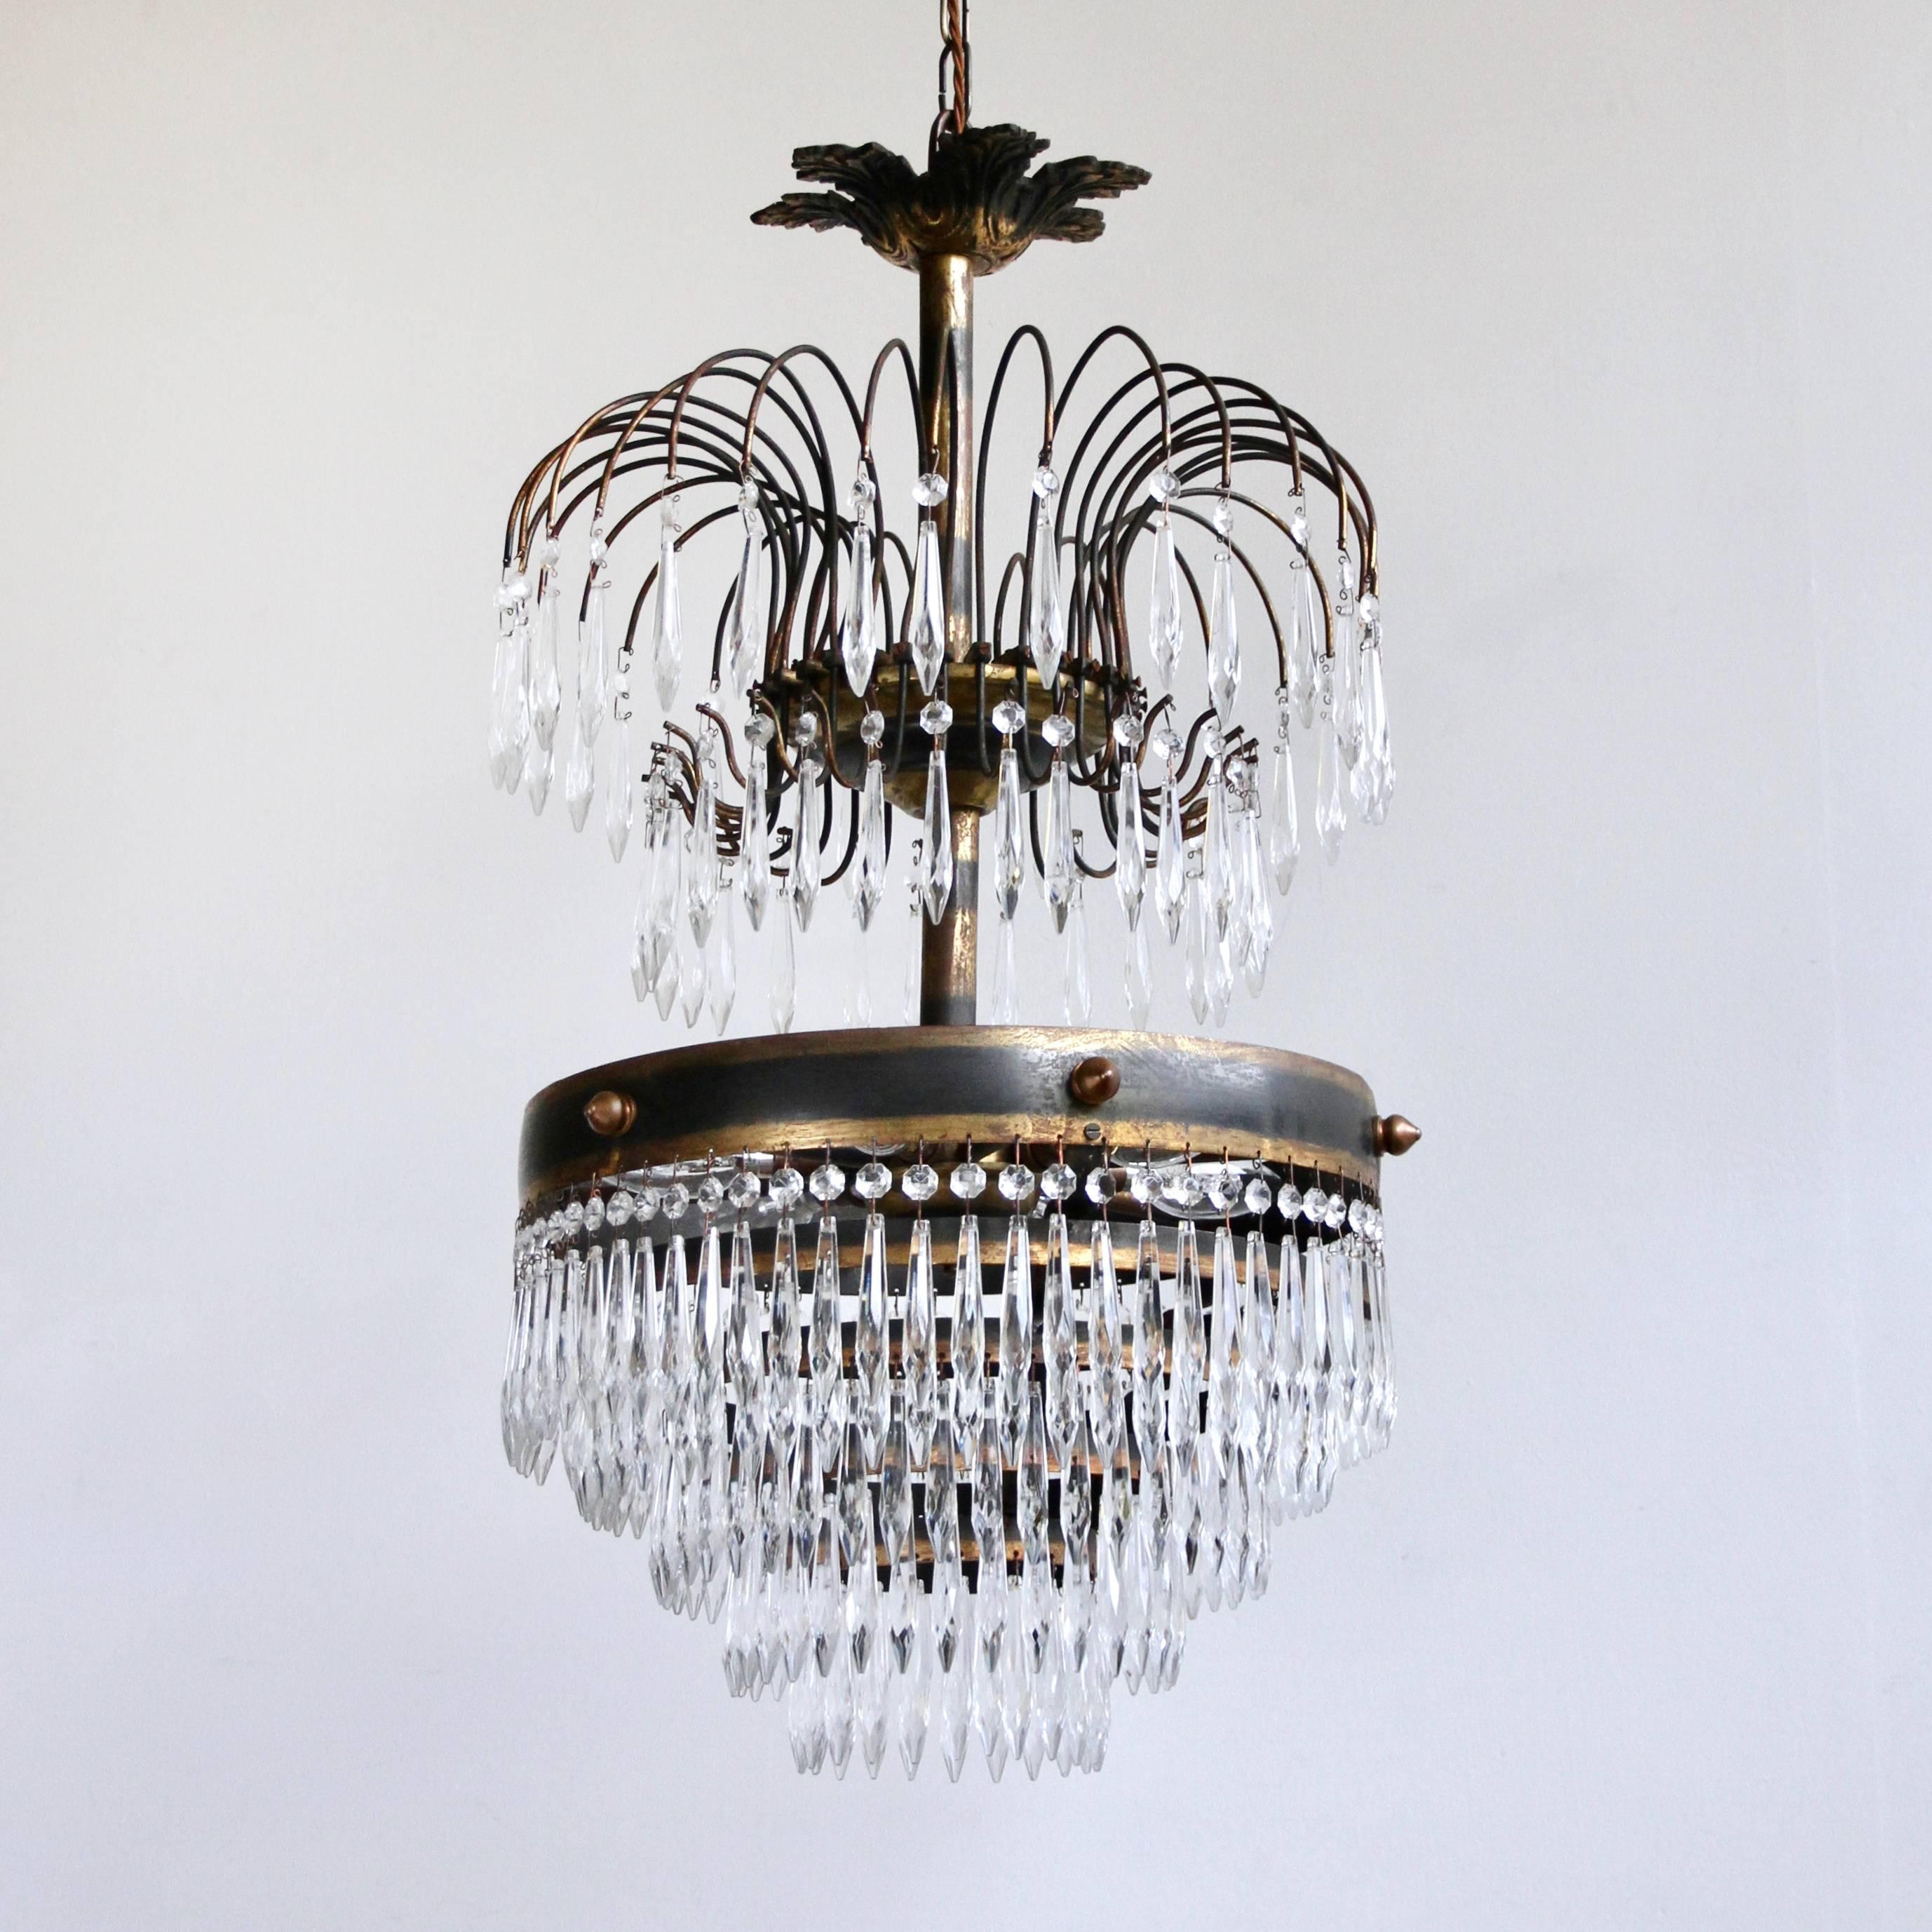 French Early 20th Century Waterfall Chandelier Dressed in Glass Icicle Drops